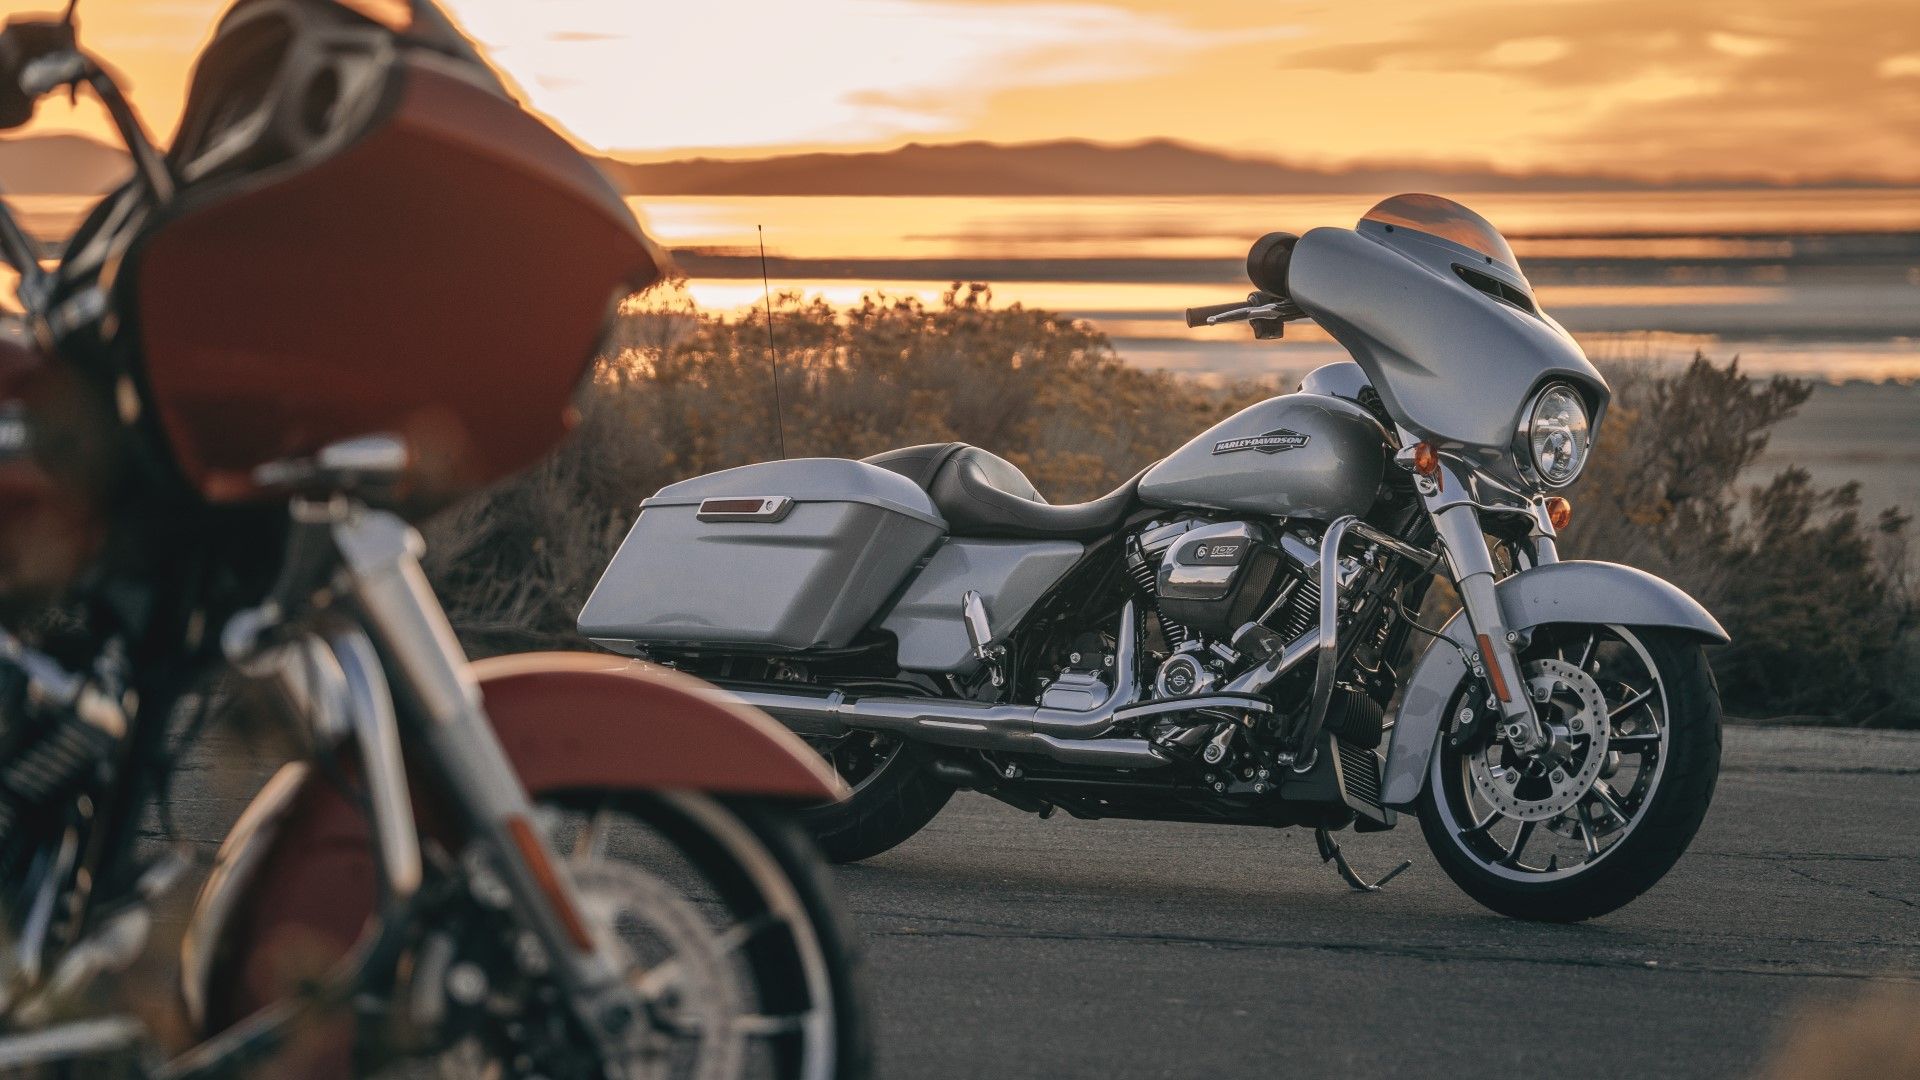 Harley-Davidson Road Glide Vs Street Glide have very few differences